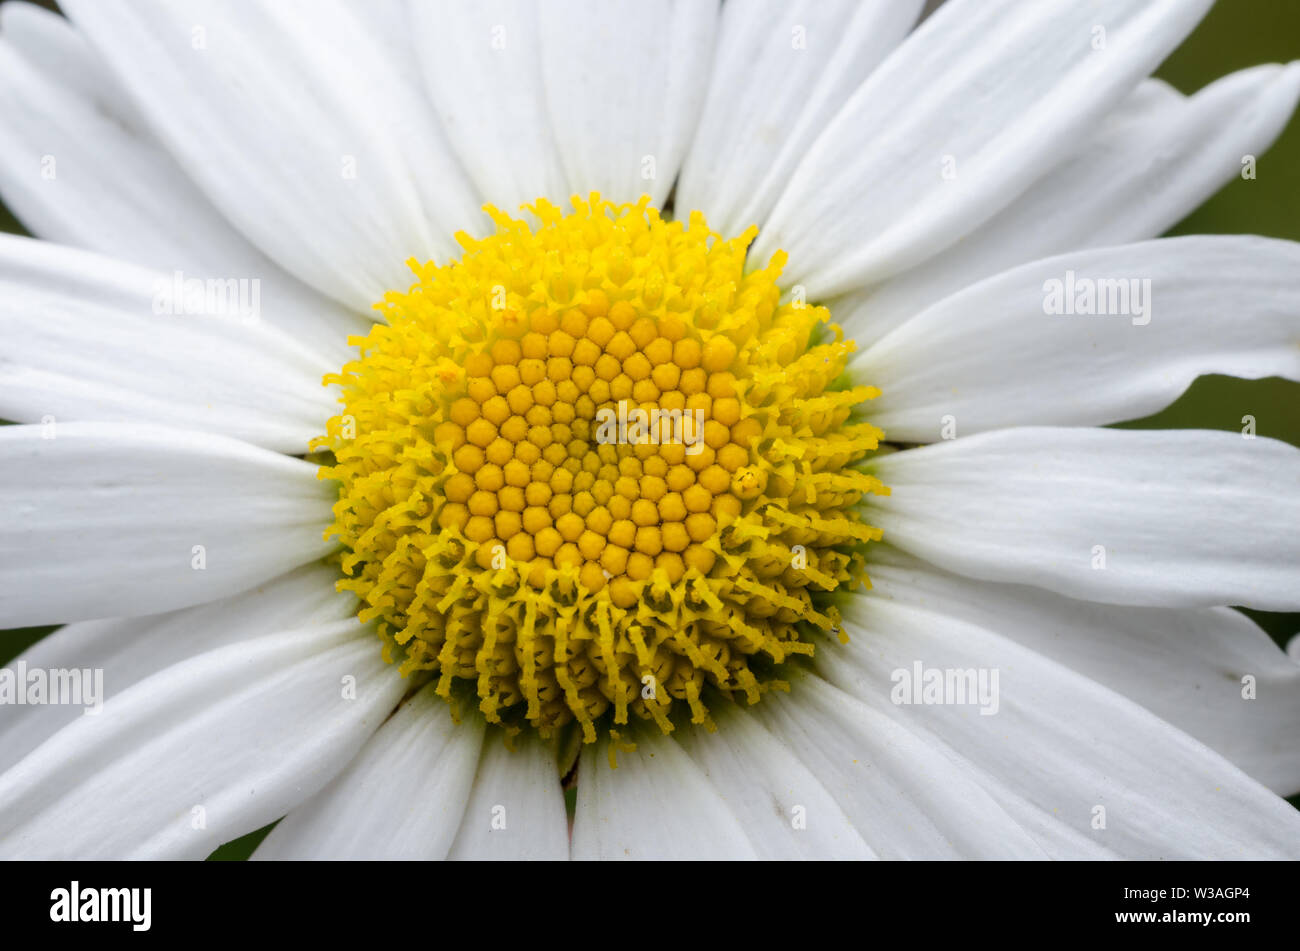 Bellis perennis, Asteraceae, Macro photograph of a Common Daisy Flower Stock Photo